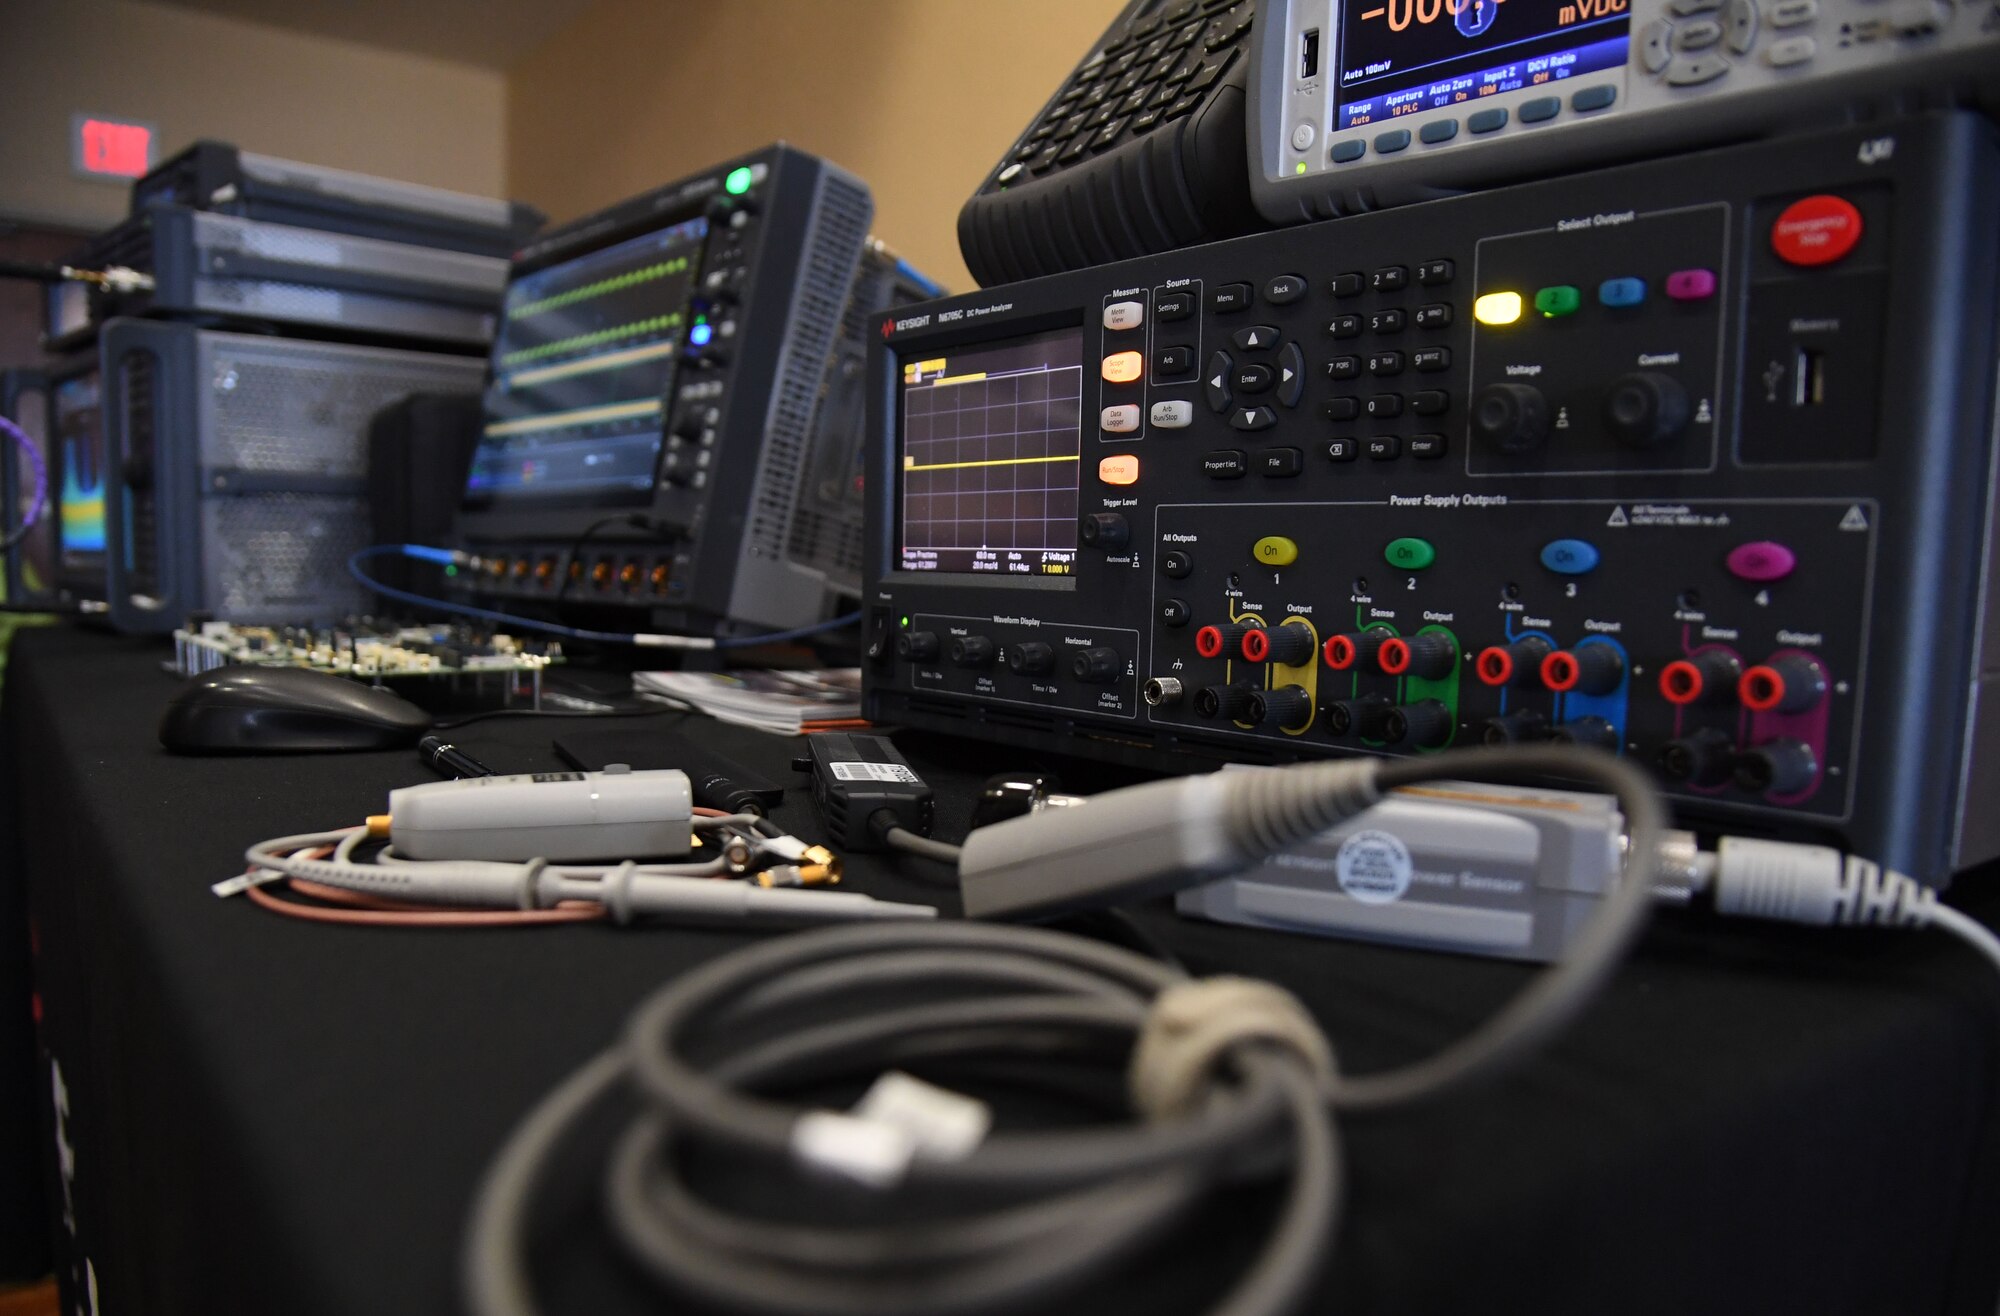 Radio Frequency signaling equipment is on display during the Technology Expo inside the Bay Breeze Event Center at Keesler Air Force Base, Mississippi, Feb. 16, 2023.